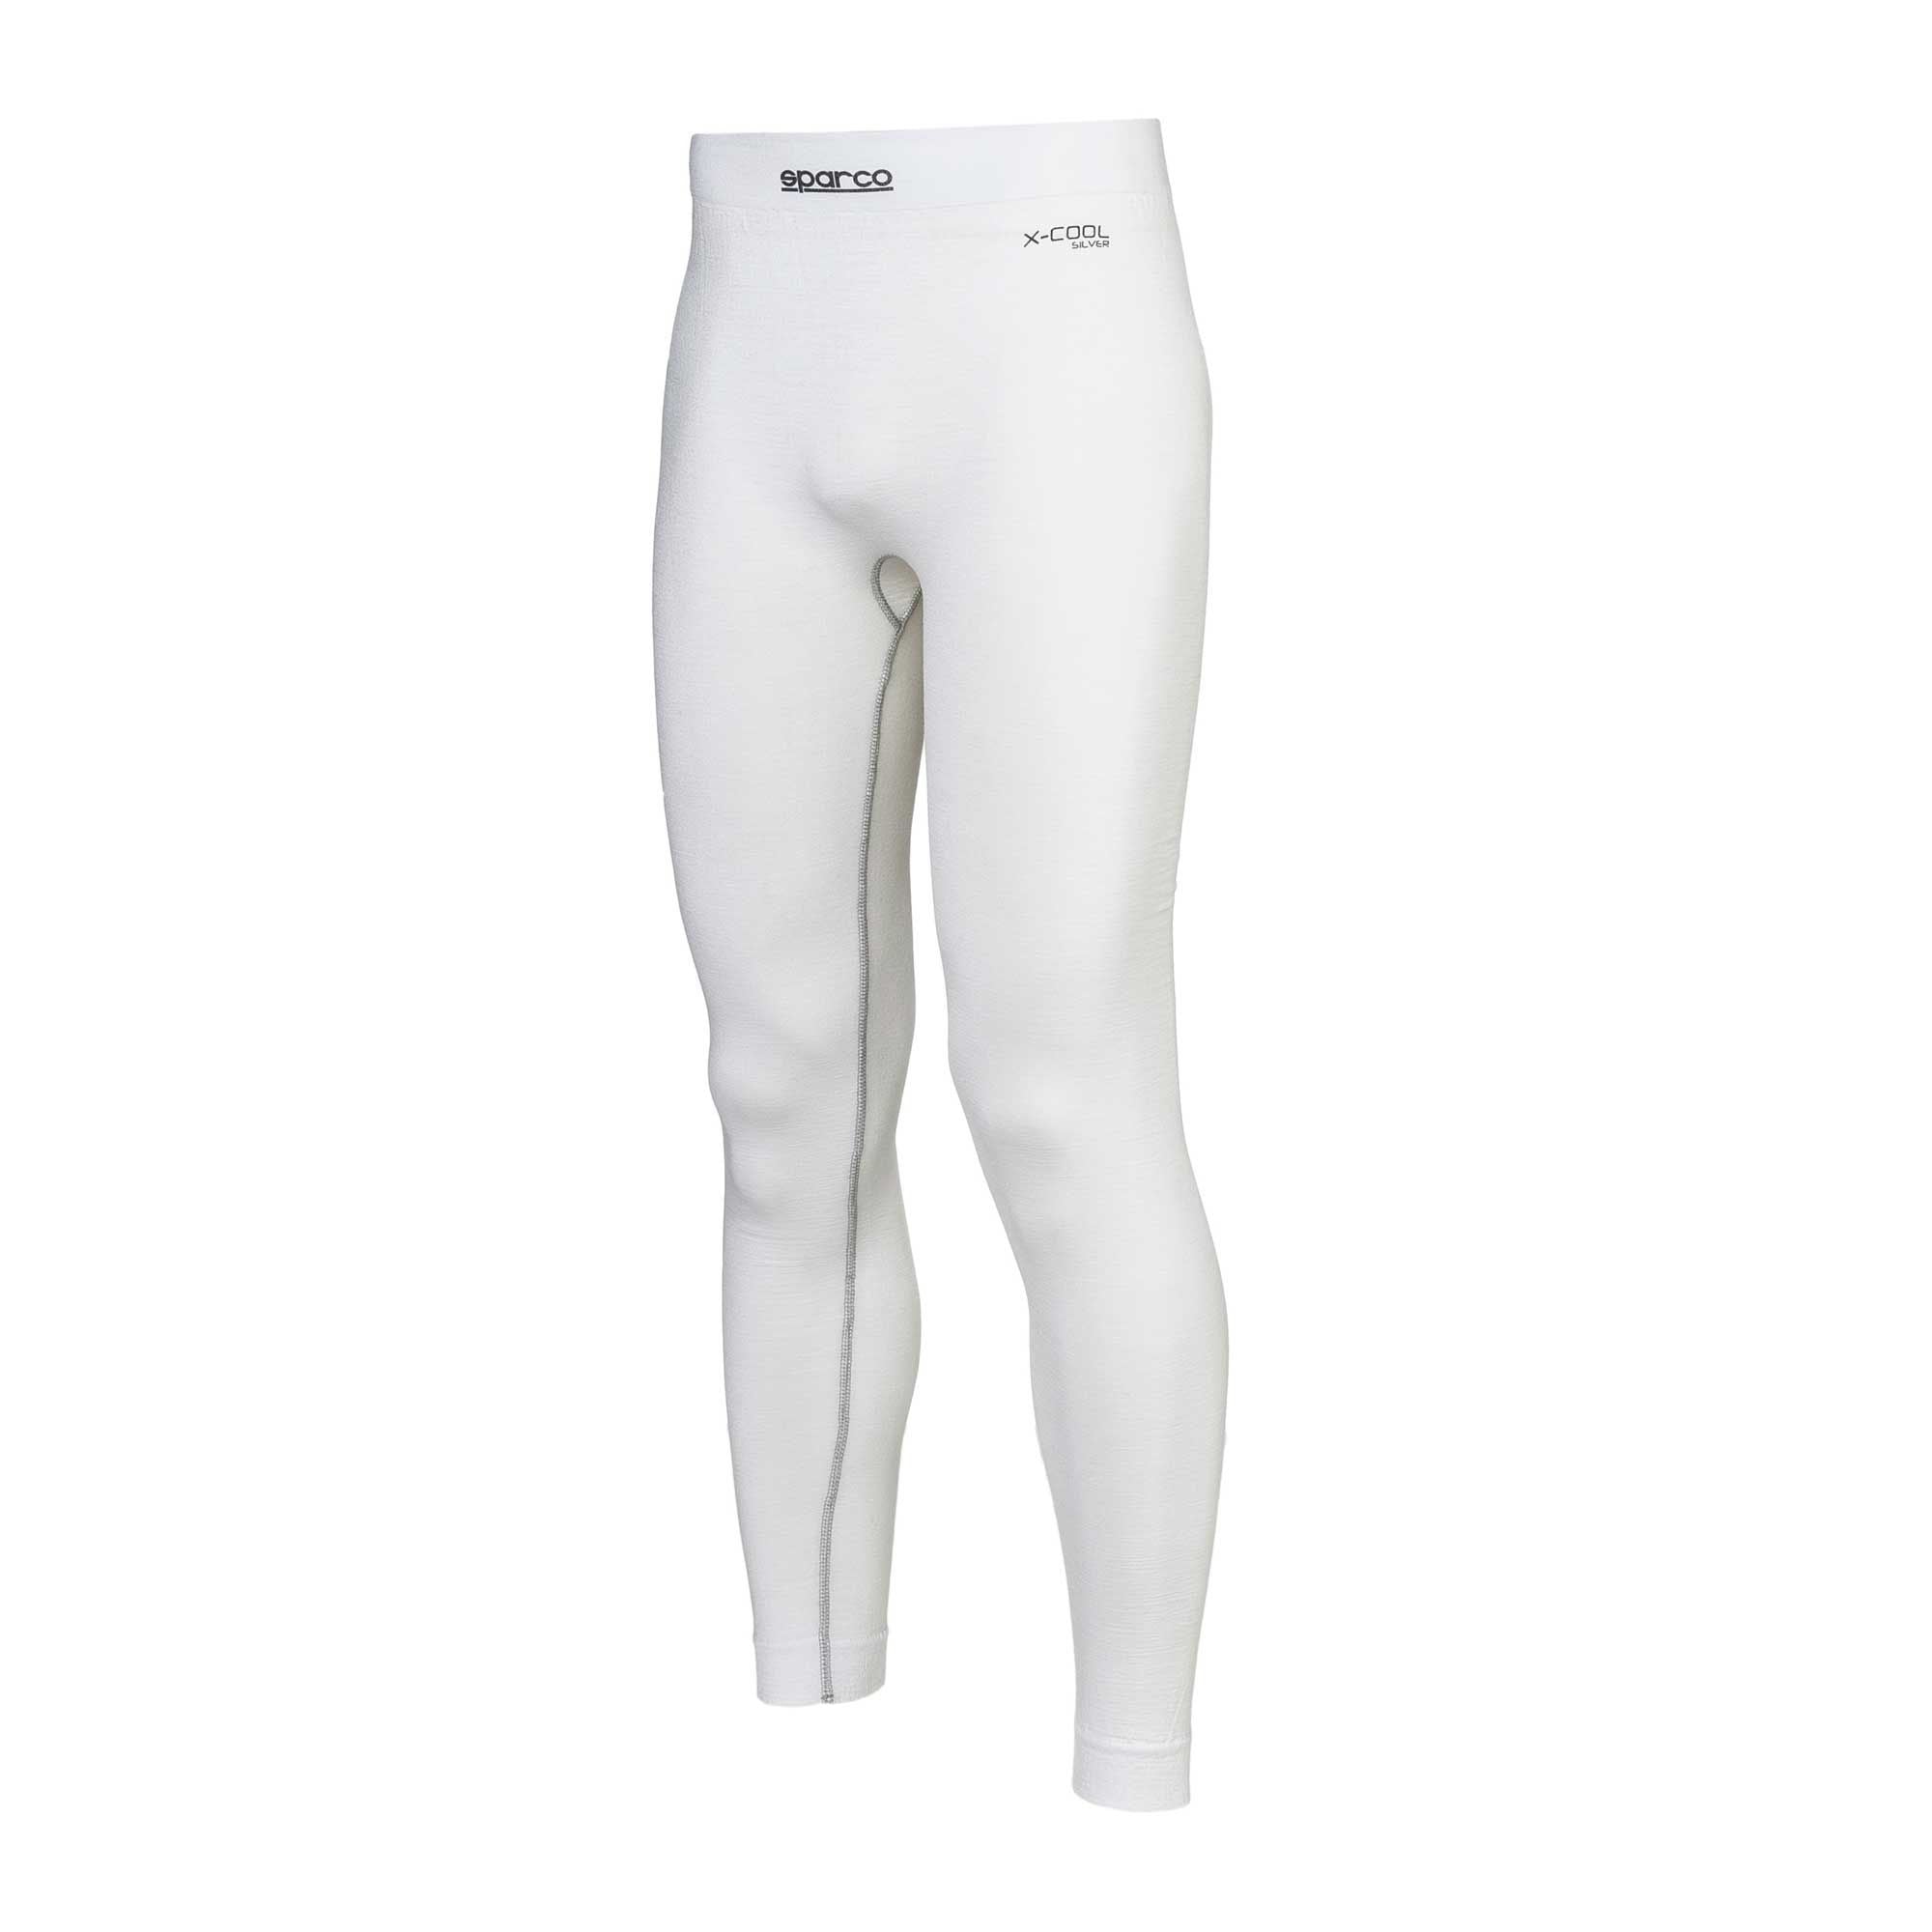 Sparco Shield RW-9 Pants - Saferacer